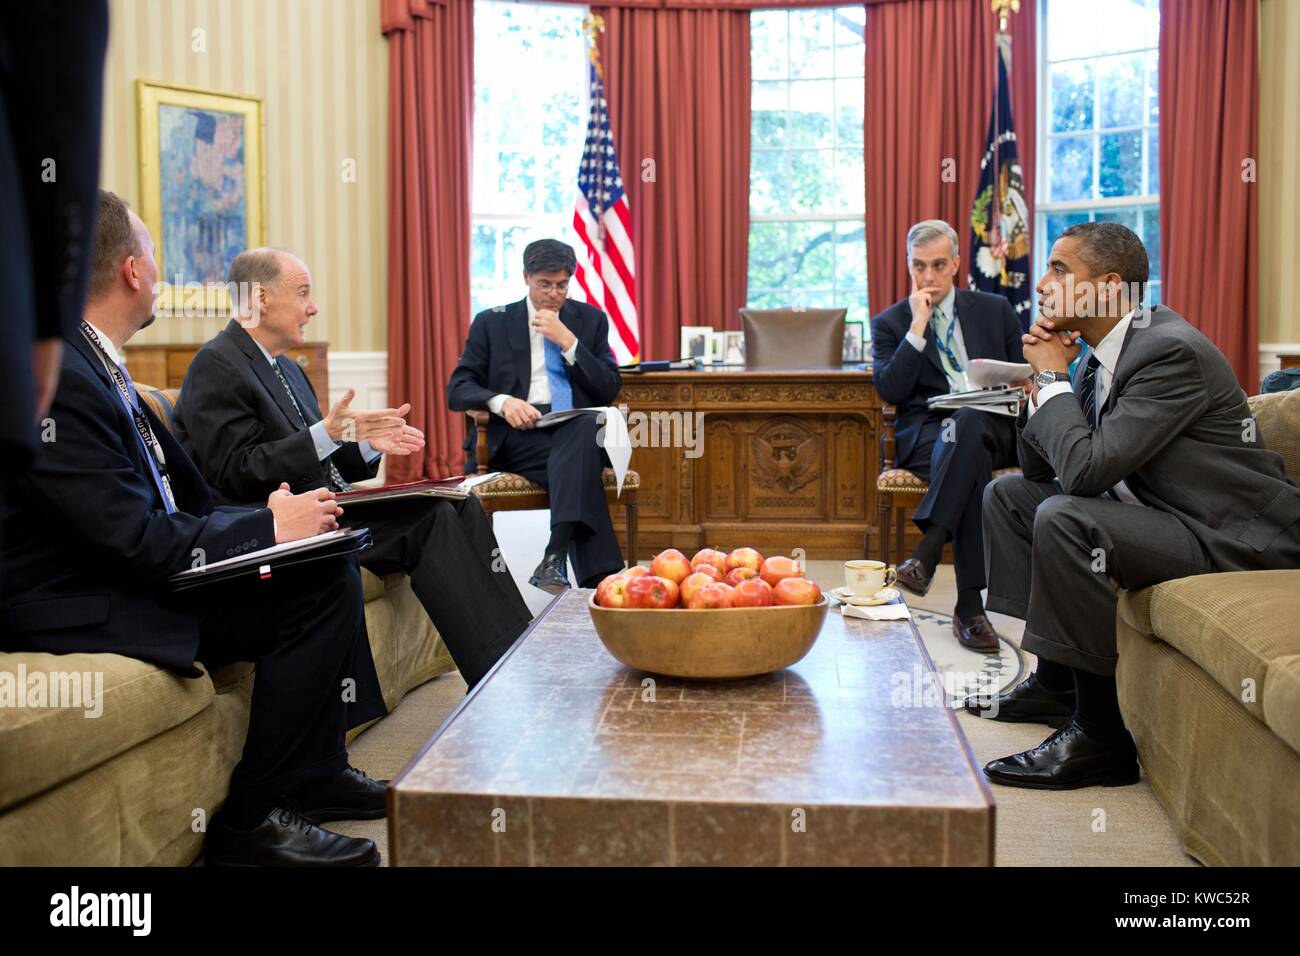 President Barack Obama's senior advisors before a phone call with Russia's Vladimir Putin. July 18, 2012. From left: Chris Mizelle, Dir. For Russia and Central Asia, NSS; National Security Advisor Tom Donilon; Chief of Staff Jack Lew; and Denis McDonough, Deputy National Security Advisor. (BSLOC 2015 13 259) Stock Photo